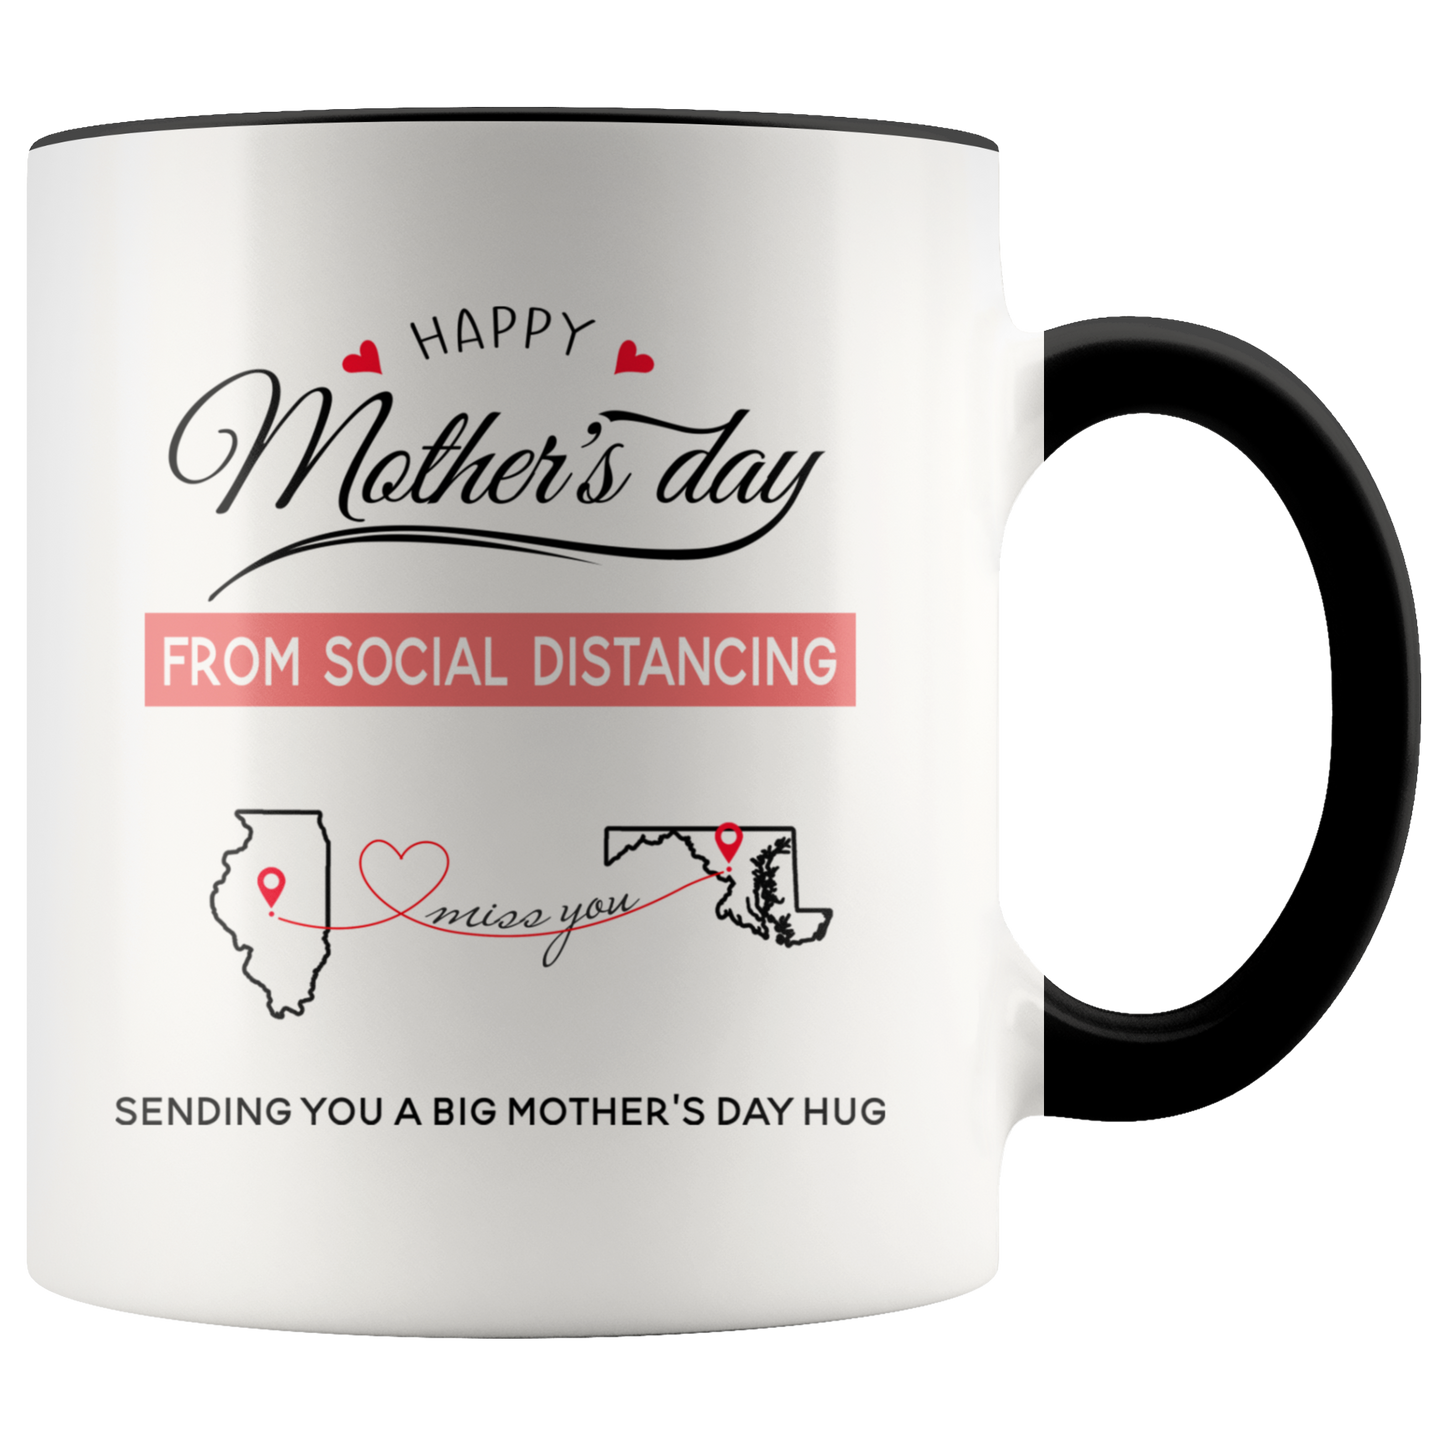 ND-21436259-sp-26371 - [ Illinois | Maryland ] (CC_Accent_Mug_) Happy Mothers Day From Social Distancing, Sending You A Big